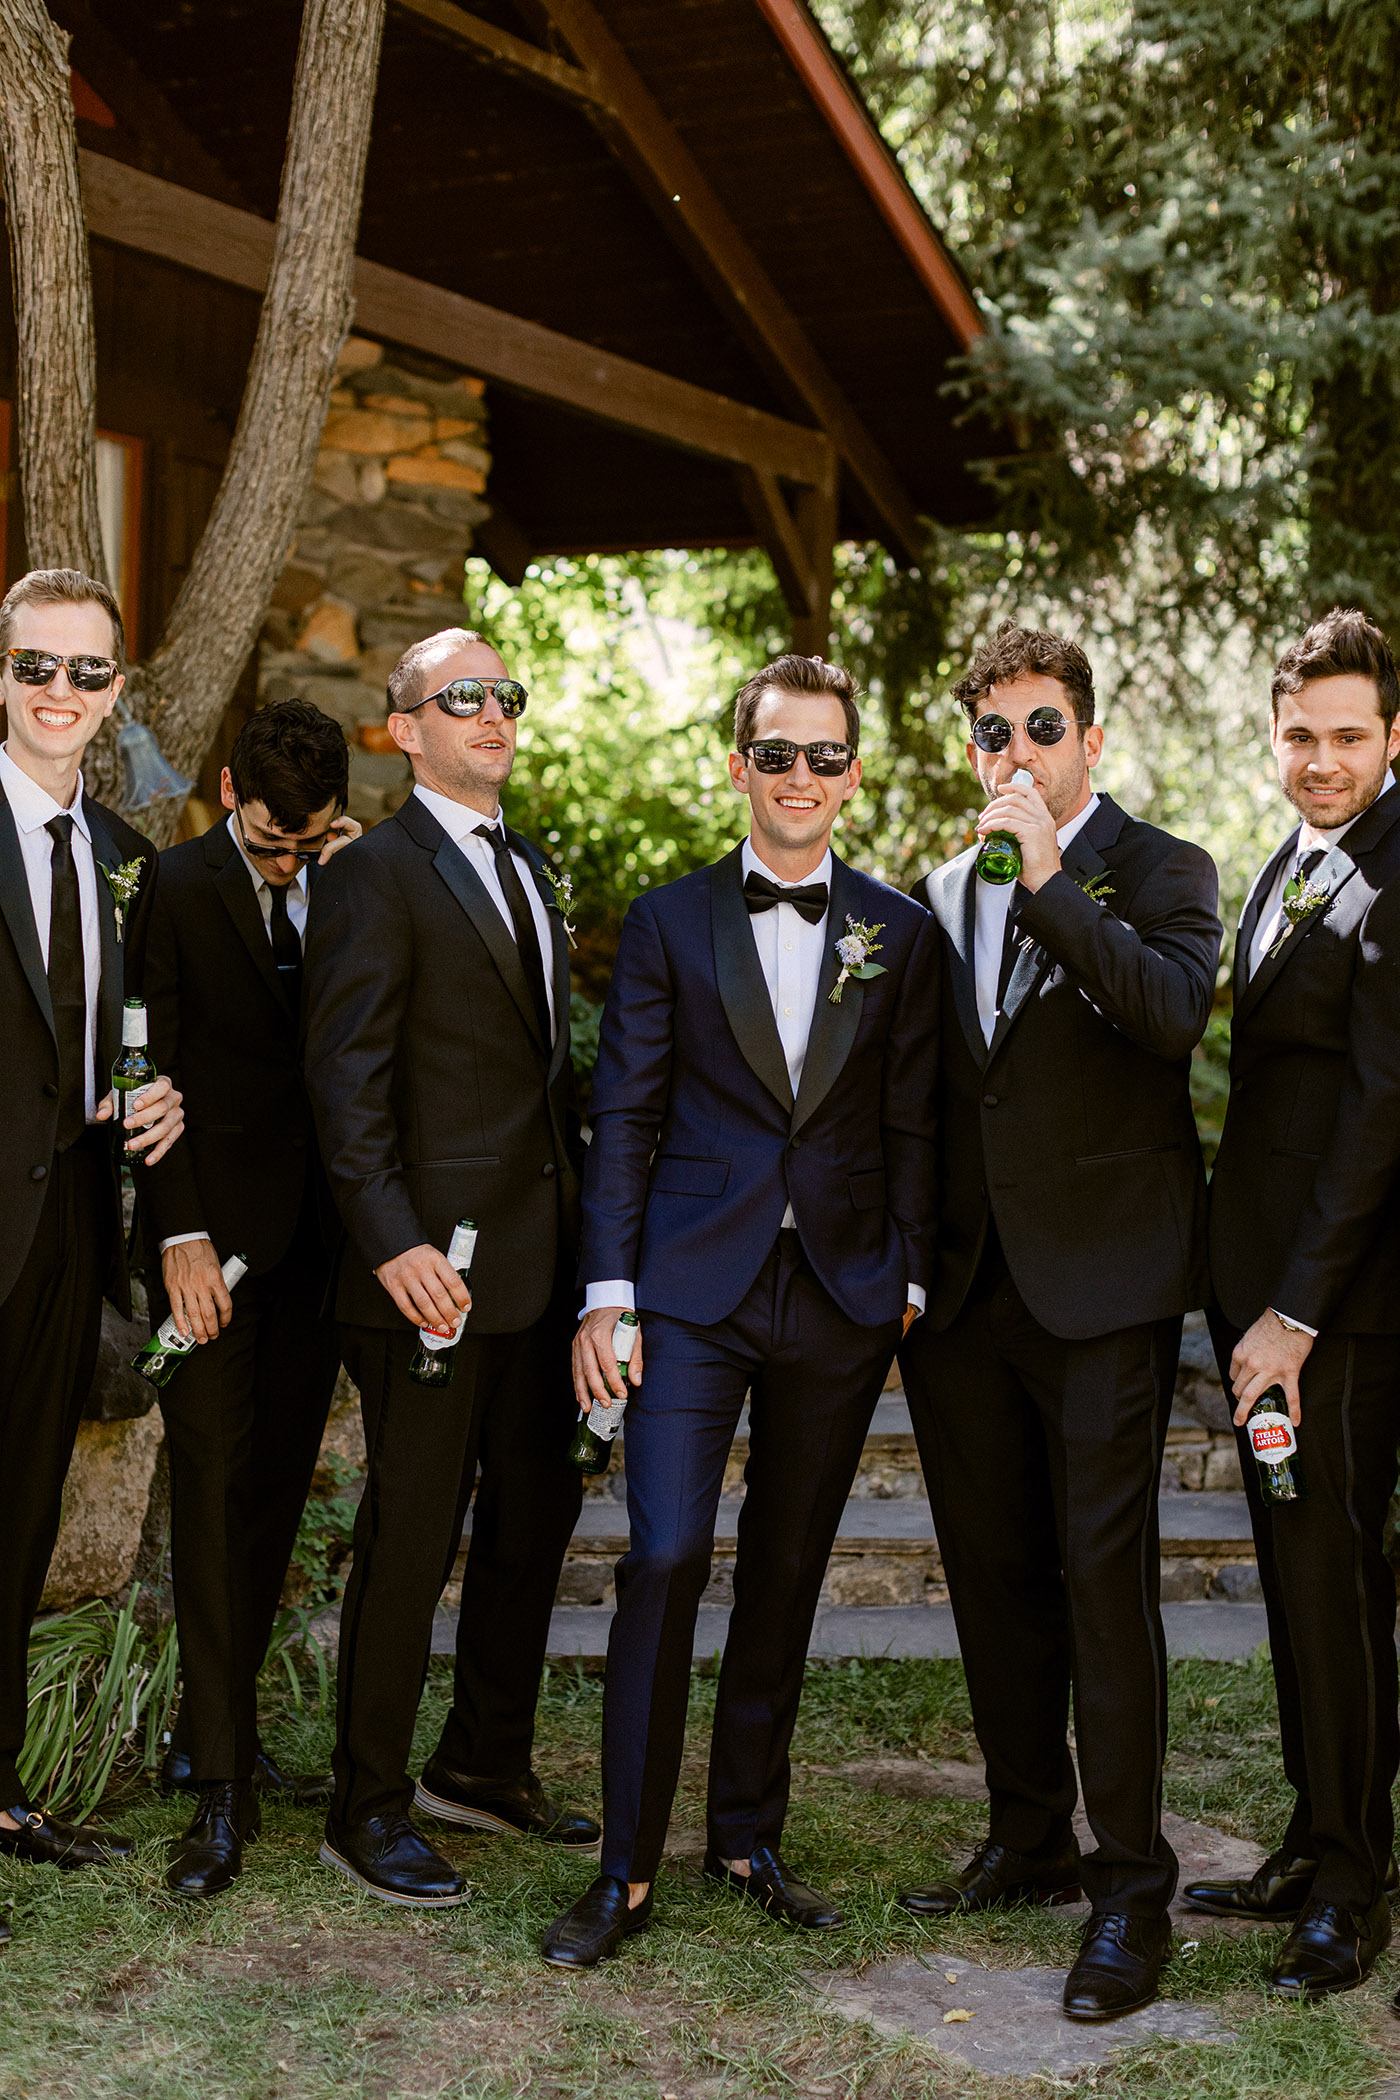 blue and black groomsmen suit for a spring wedding in sedona arizona